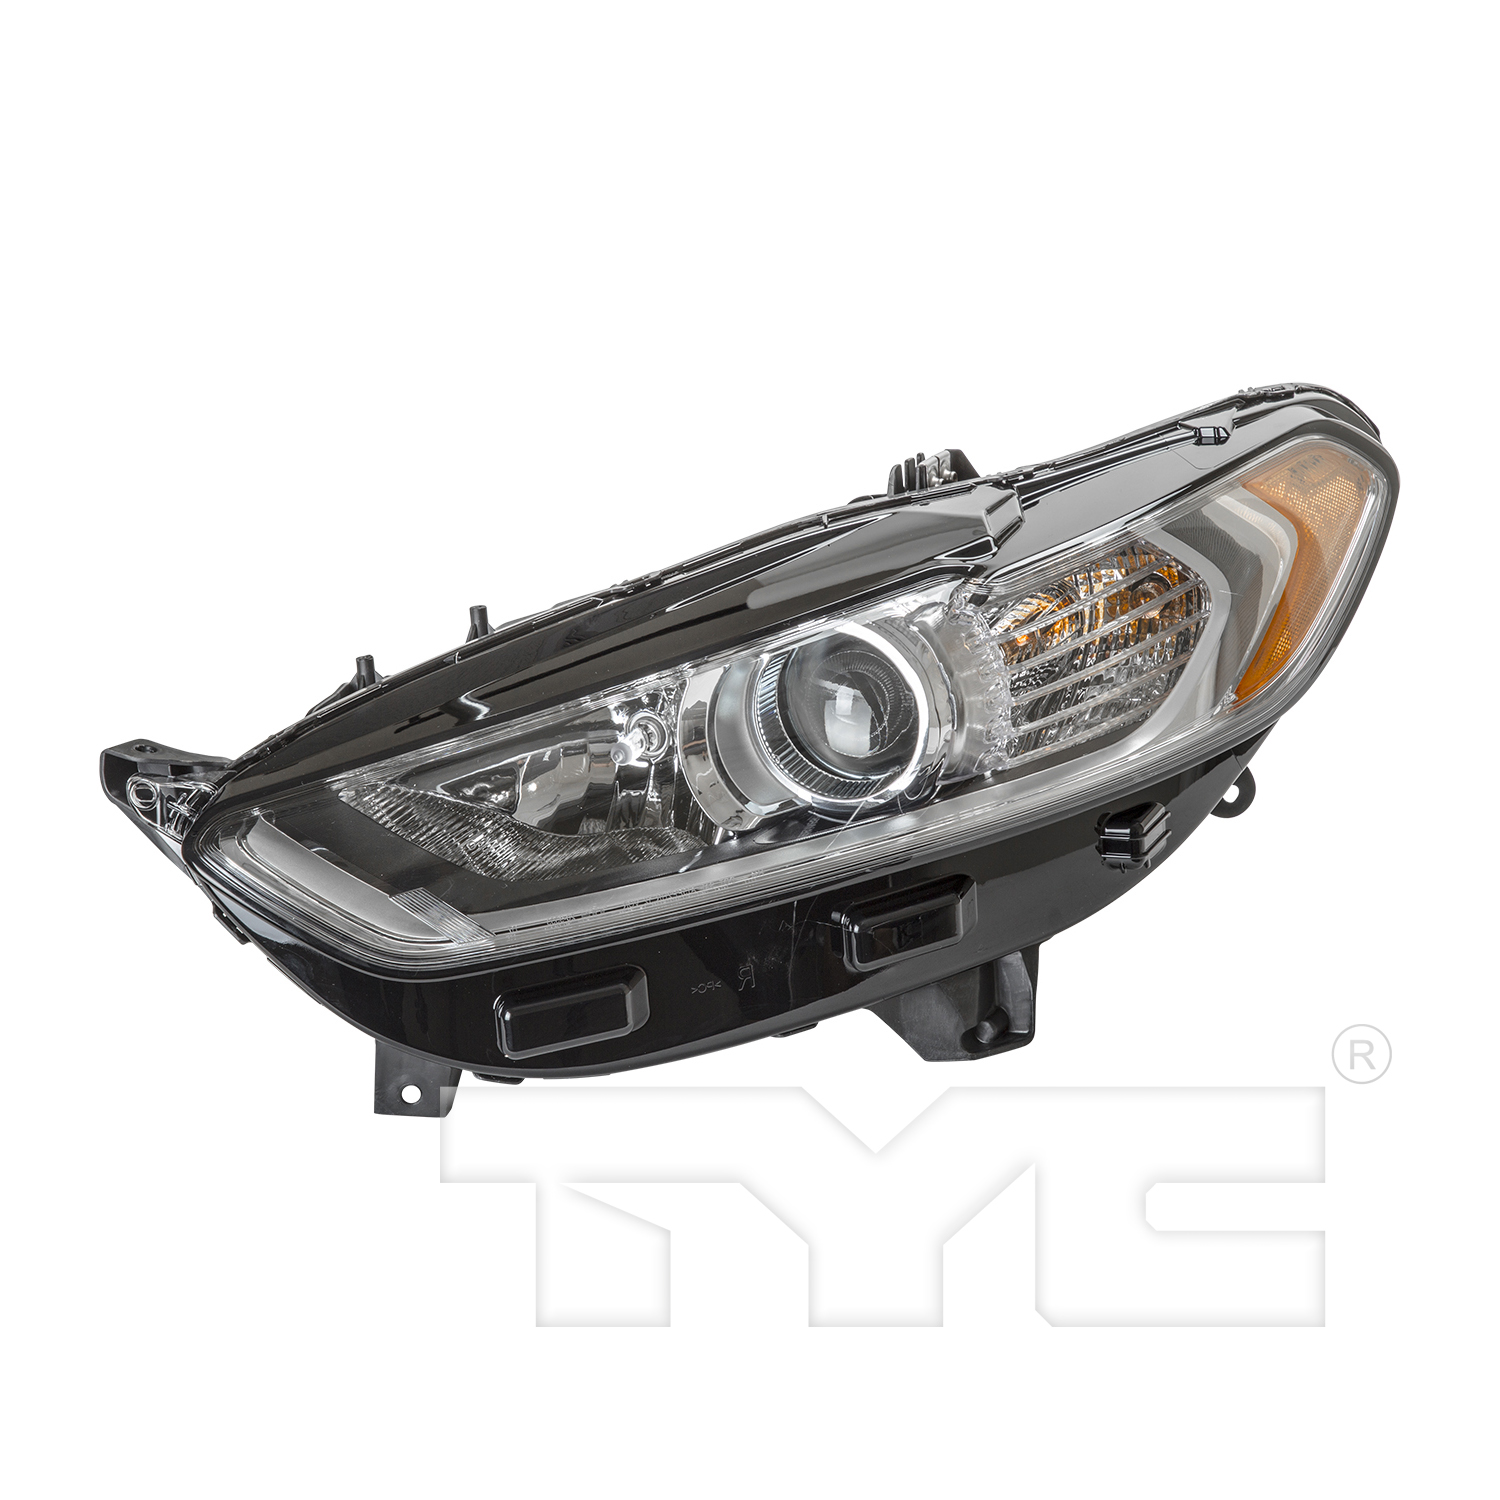 Aftermarket HEADLIGHTS for FORD - FUSION, FUSION,13-16,LT Headlamp assy composite